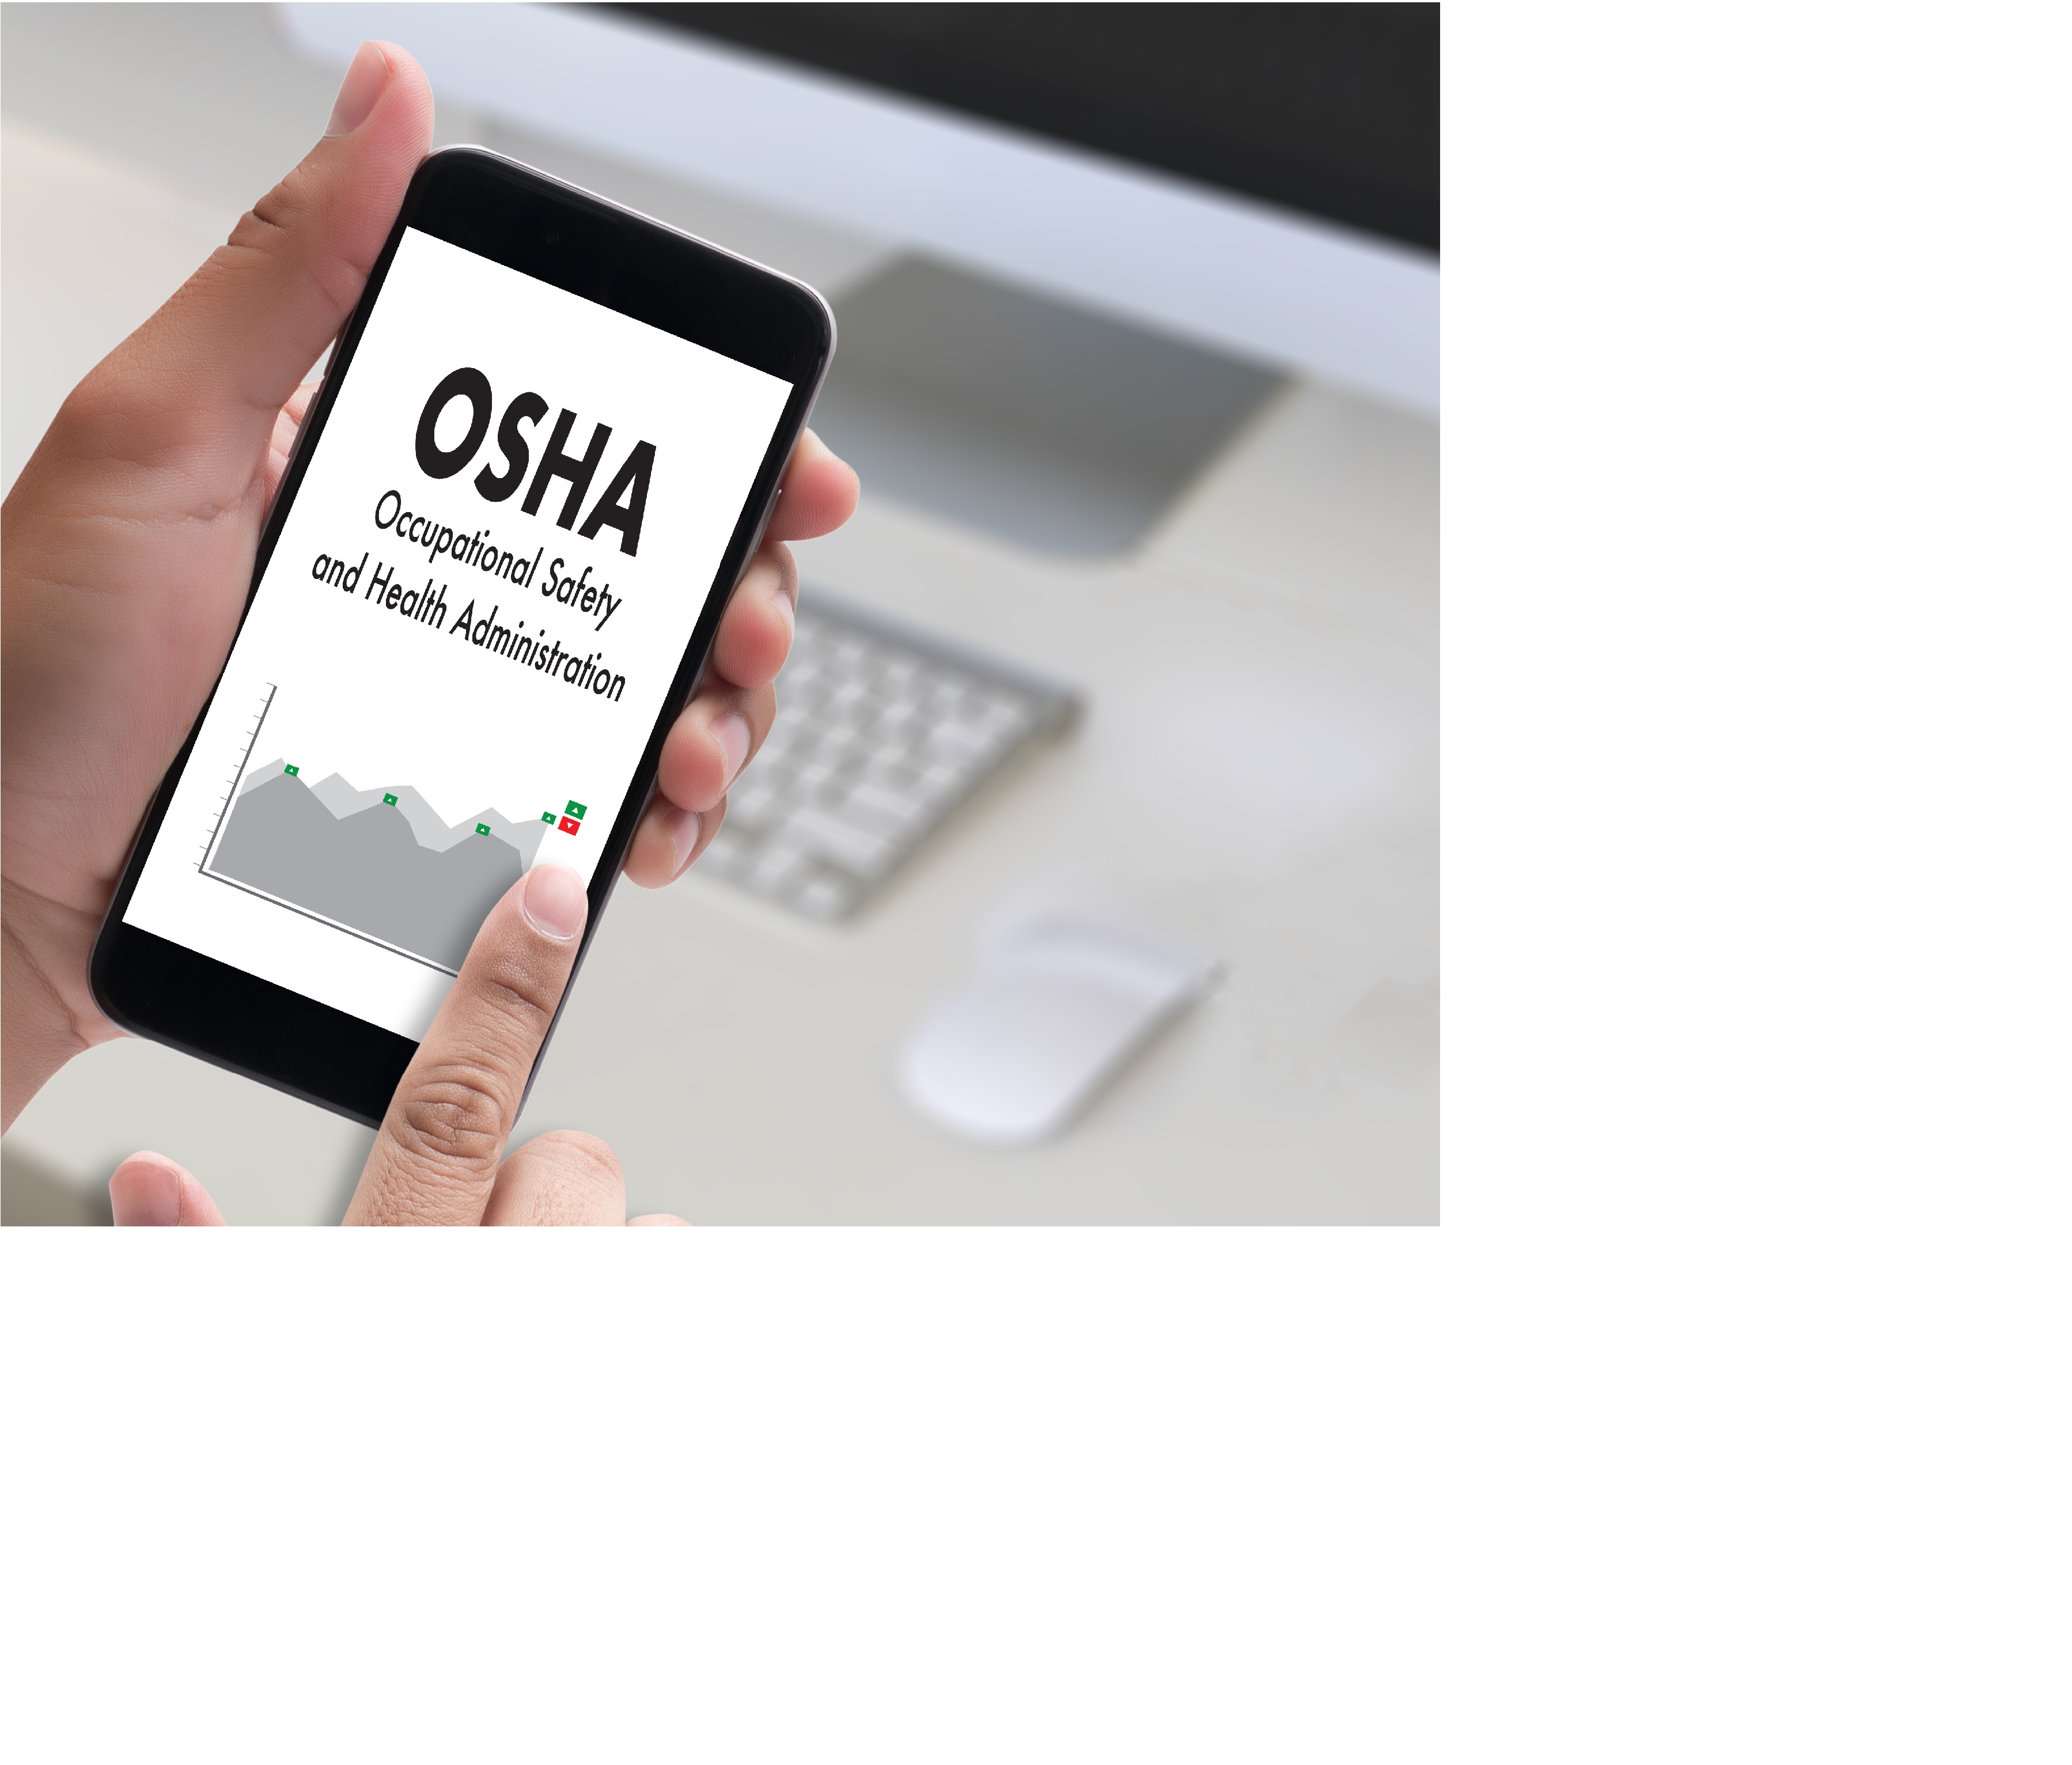 OSHA will extend July 1 deadline for Electronic Tracking of Workplace Injuries